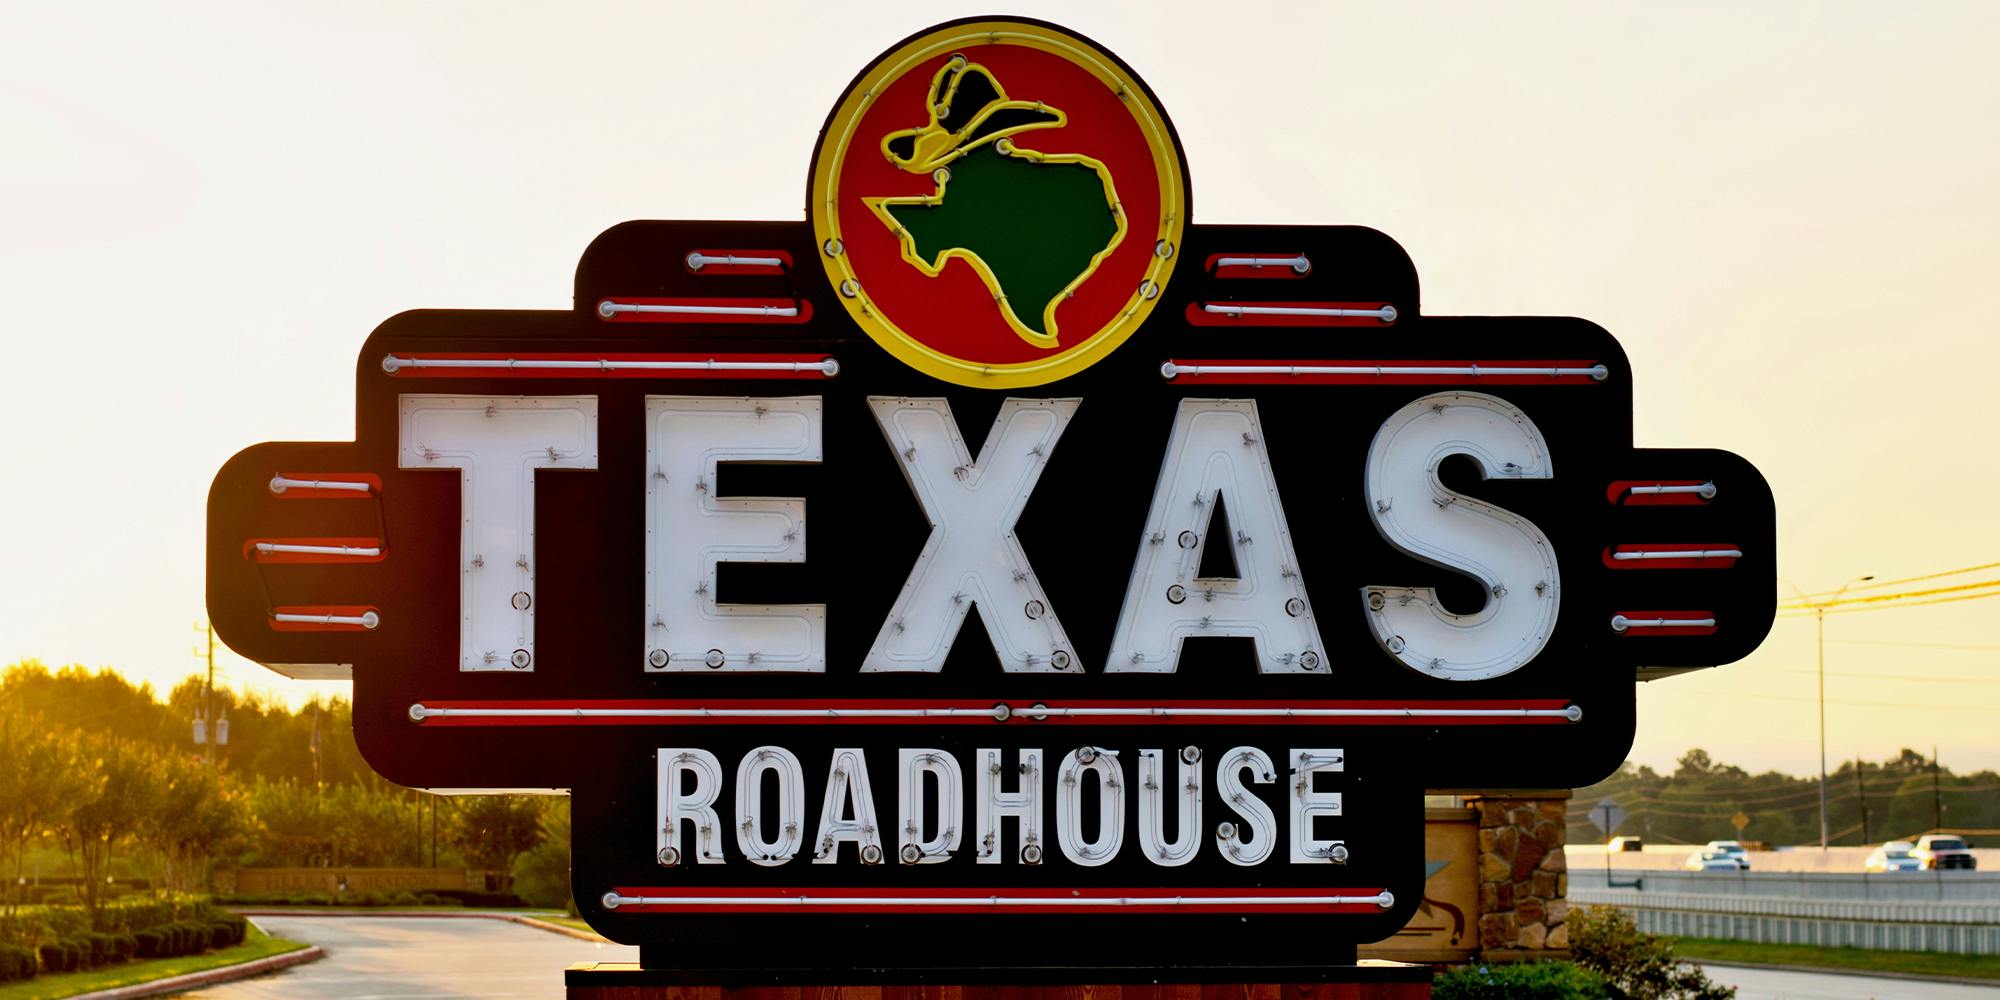 Texas Roadhouse restaurant sign on a freeway in Humble, Texas.